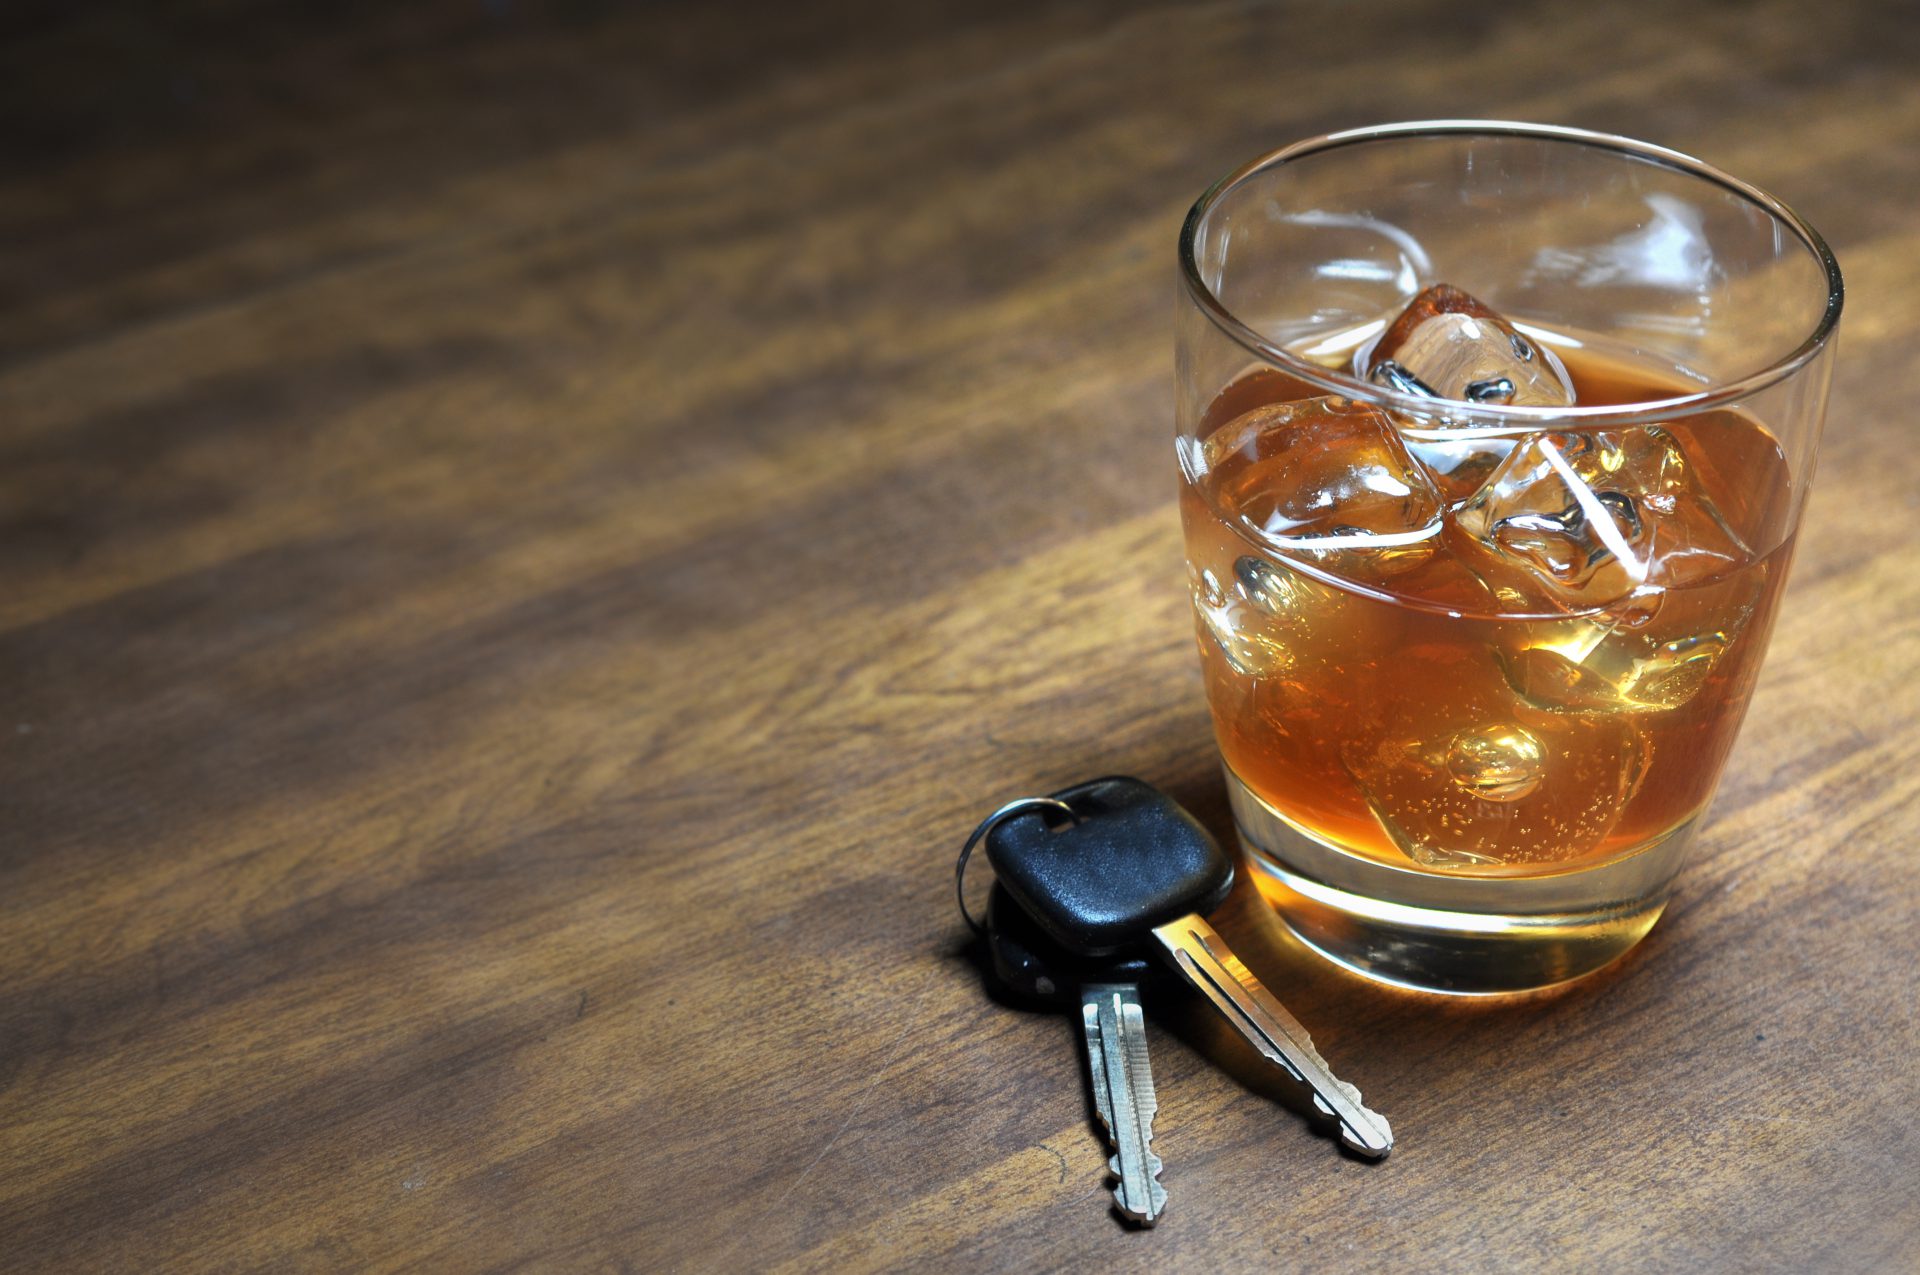 Six charged with impaired driving over three days in Fairview area